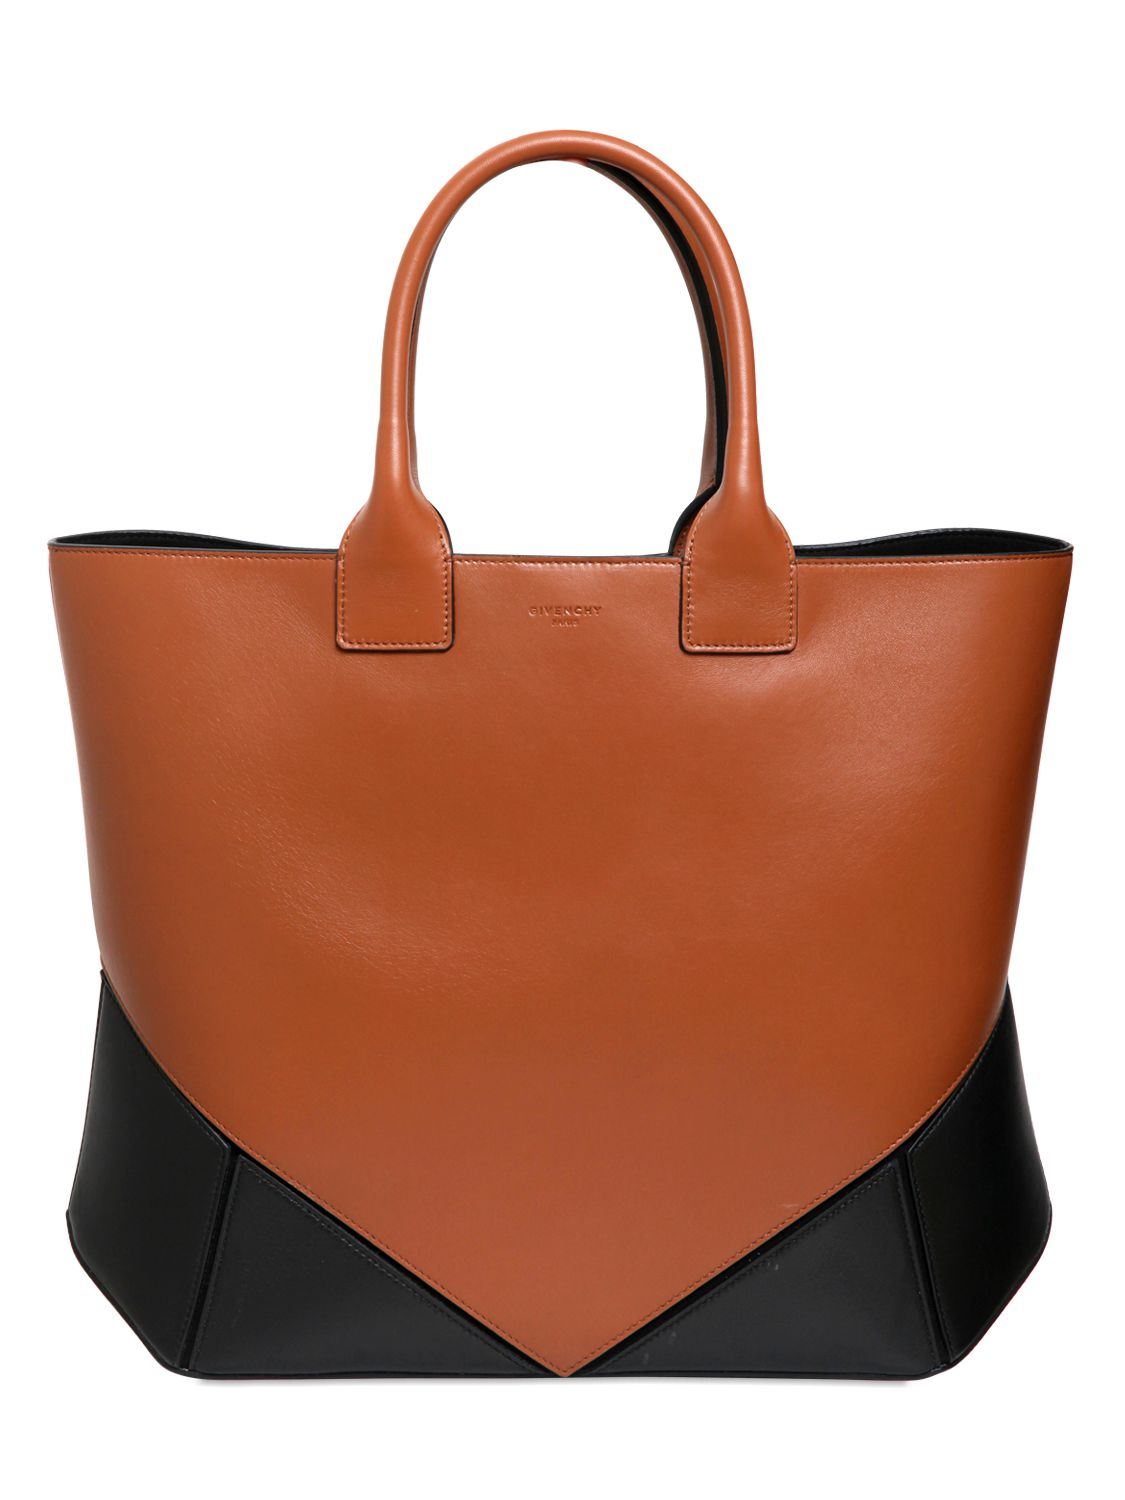 Givenchy Easy Two Tone Nappa Leather Tote Bag in Tan/Black (Brown) - Lyst